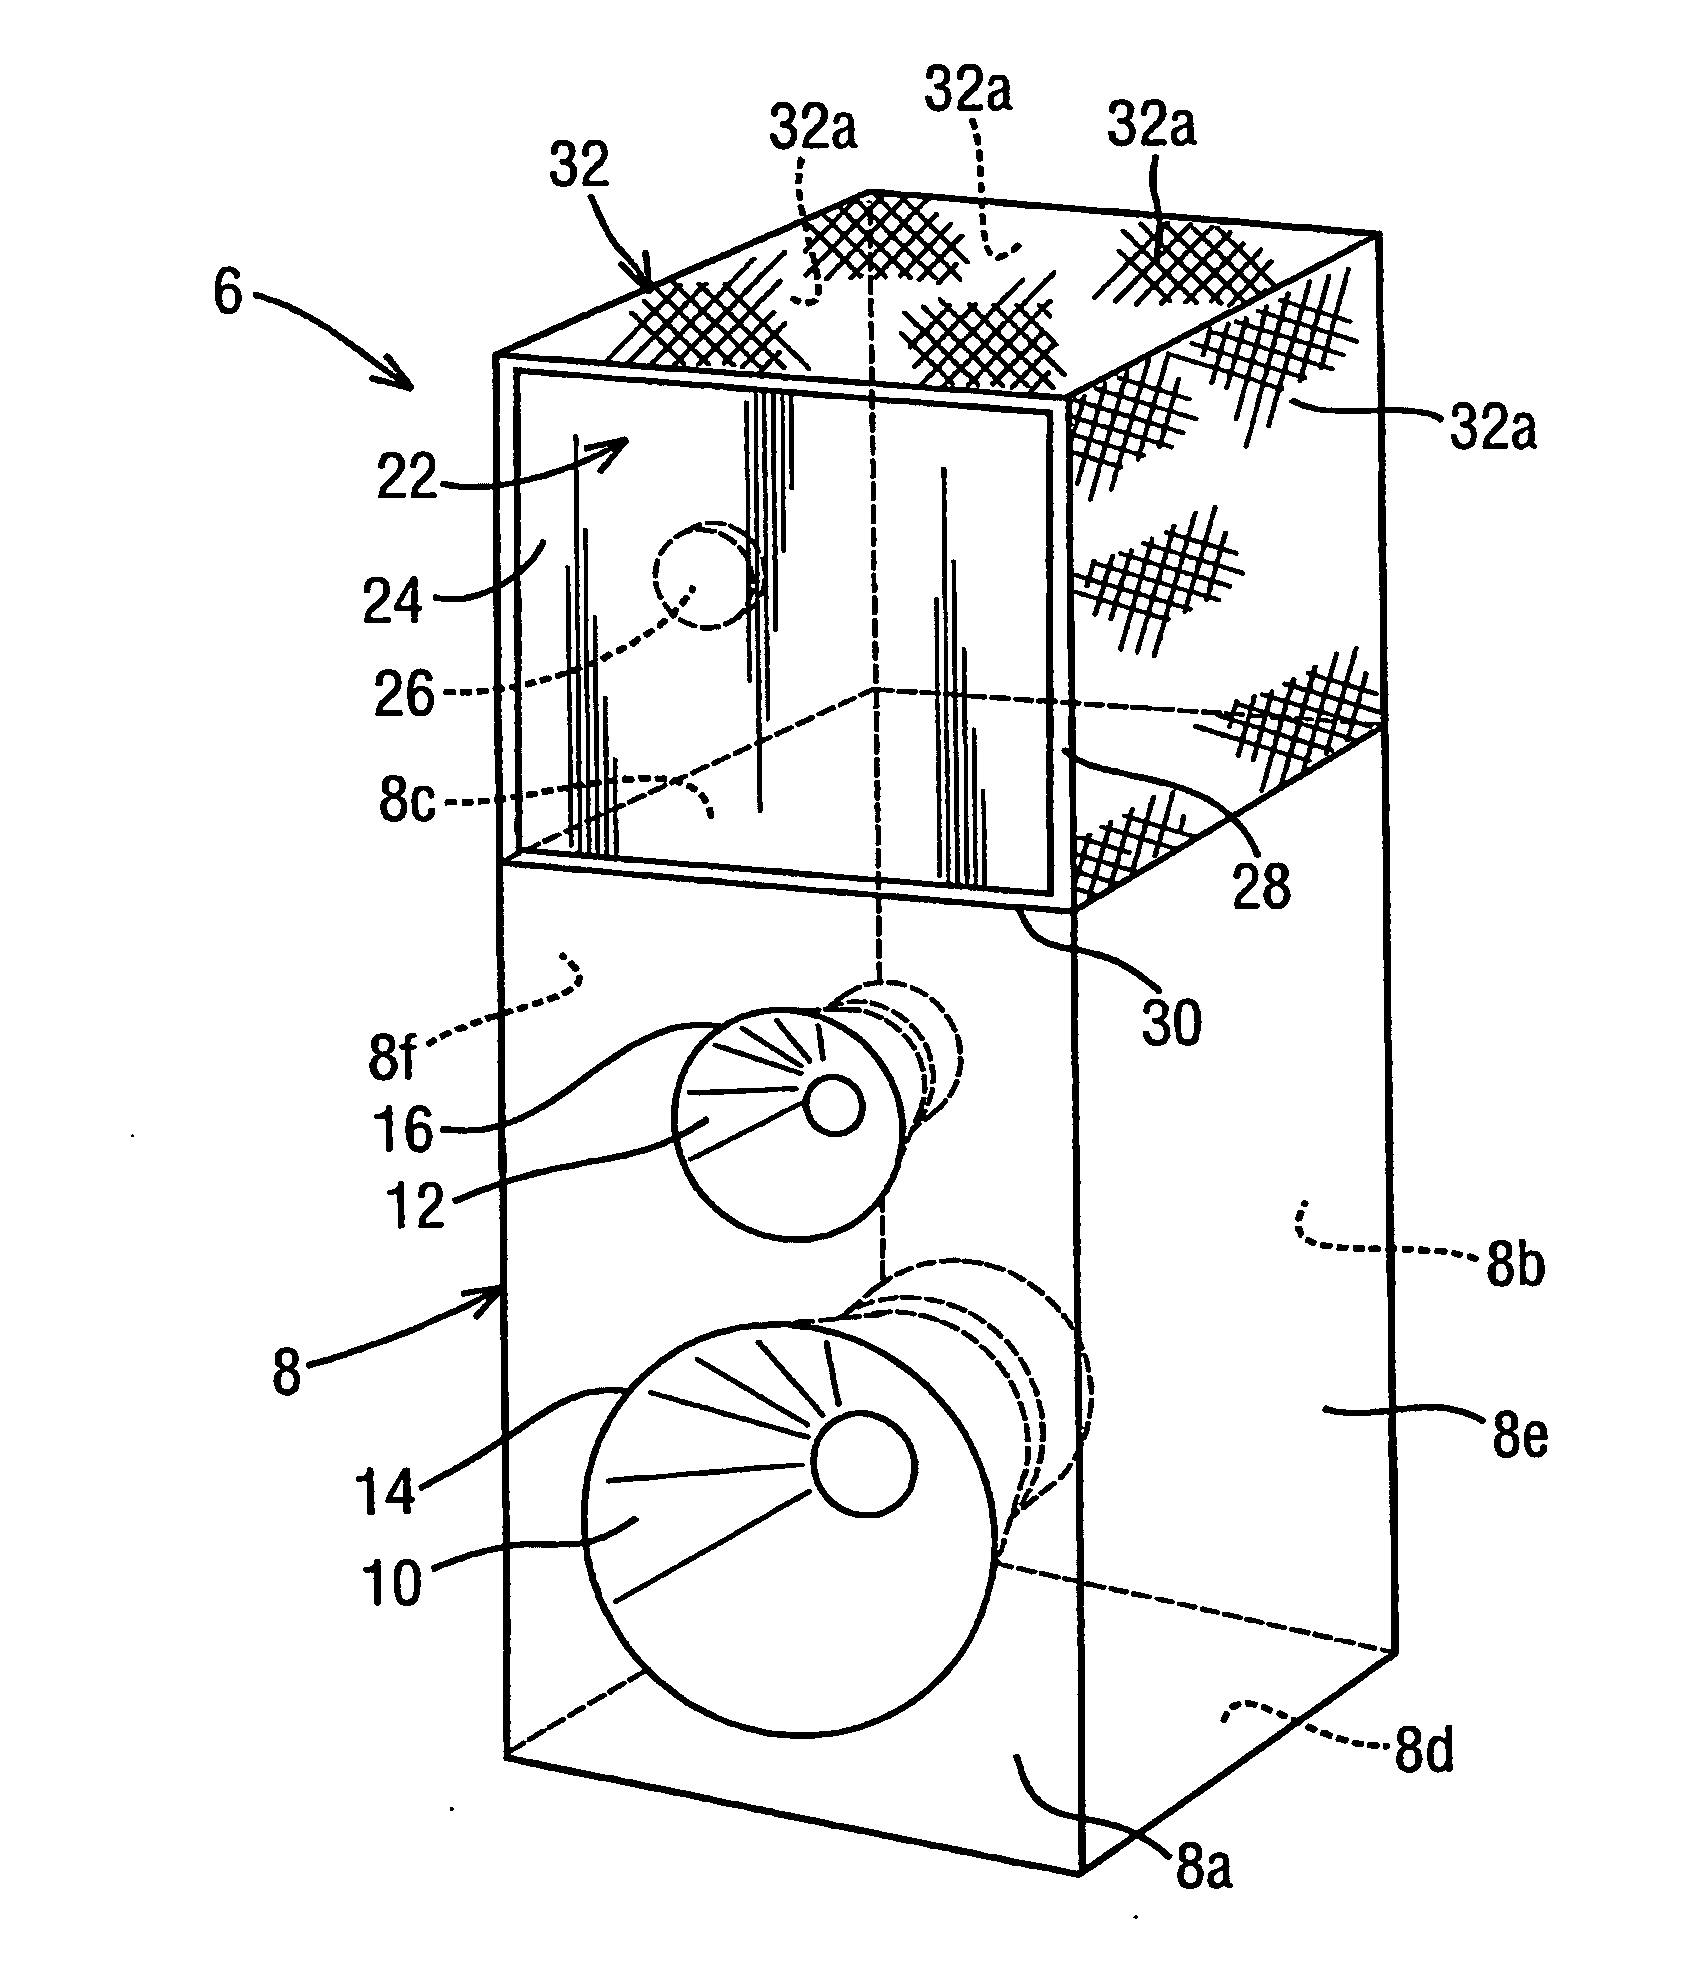 Apparatus and method for producing sound